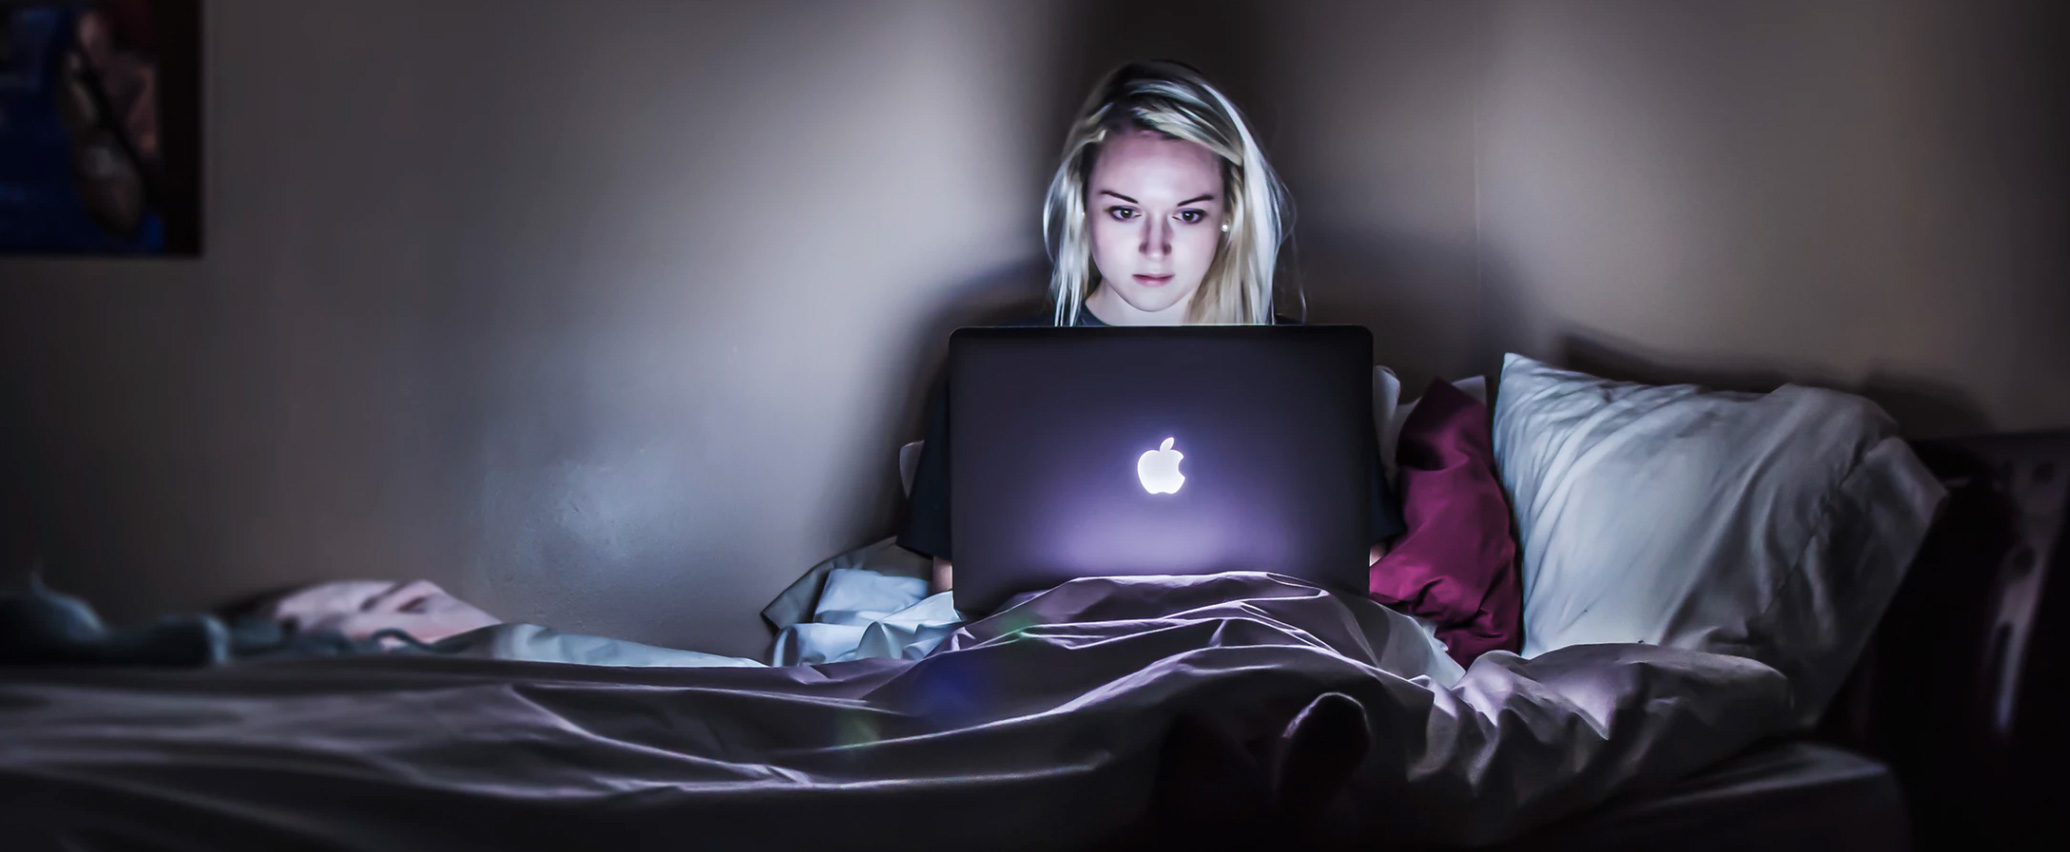 Girl with laptop in bed